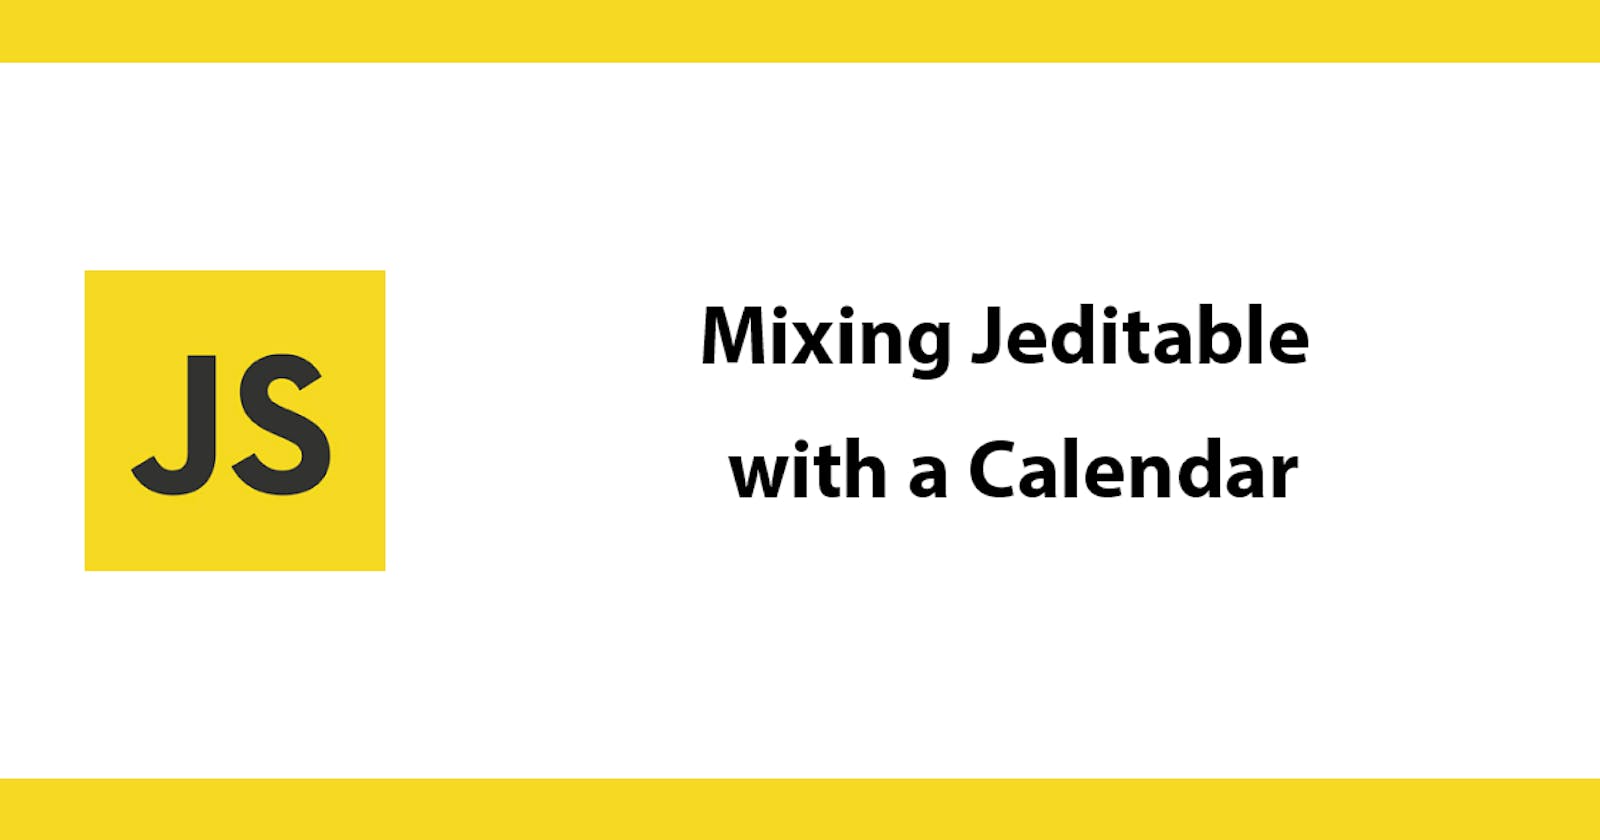 Mixing Jeditable with a Calendar